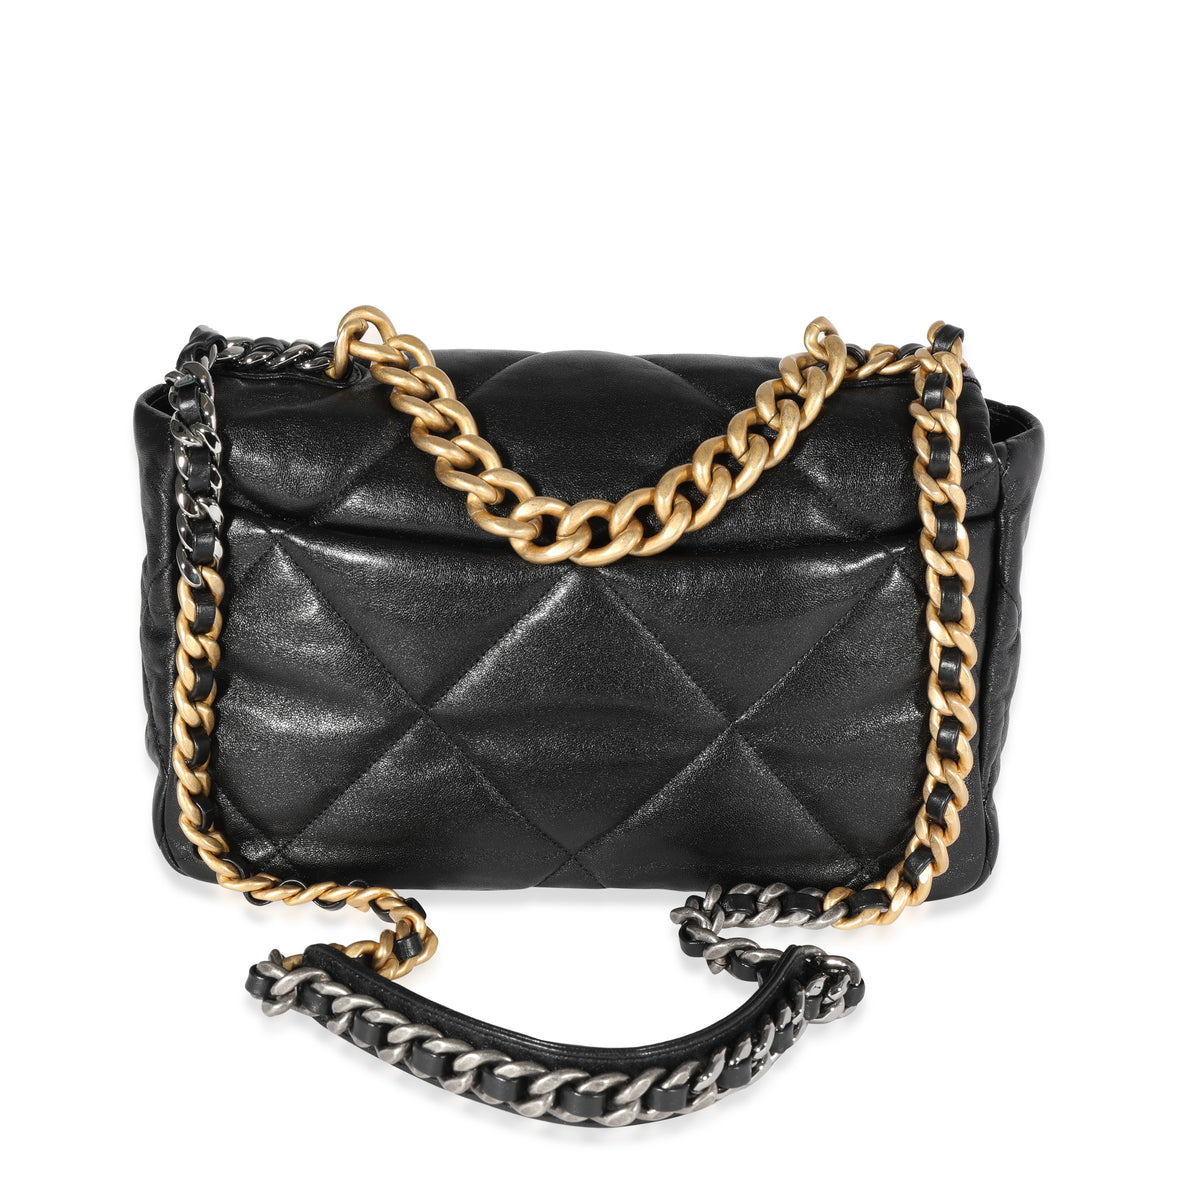 Chanel Black Quilted Lambskin Medium Chanel 19 Bag